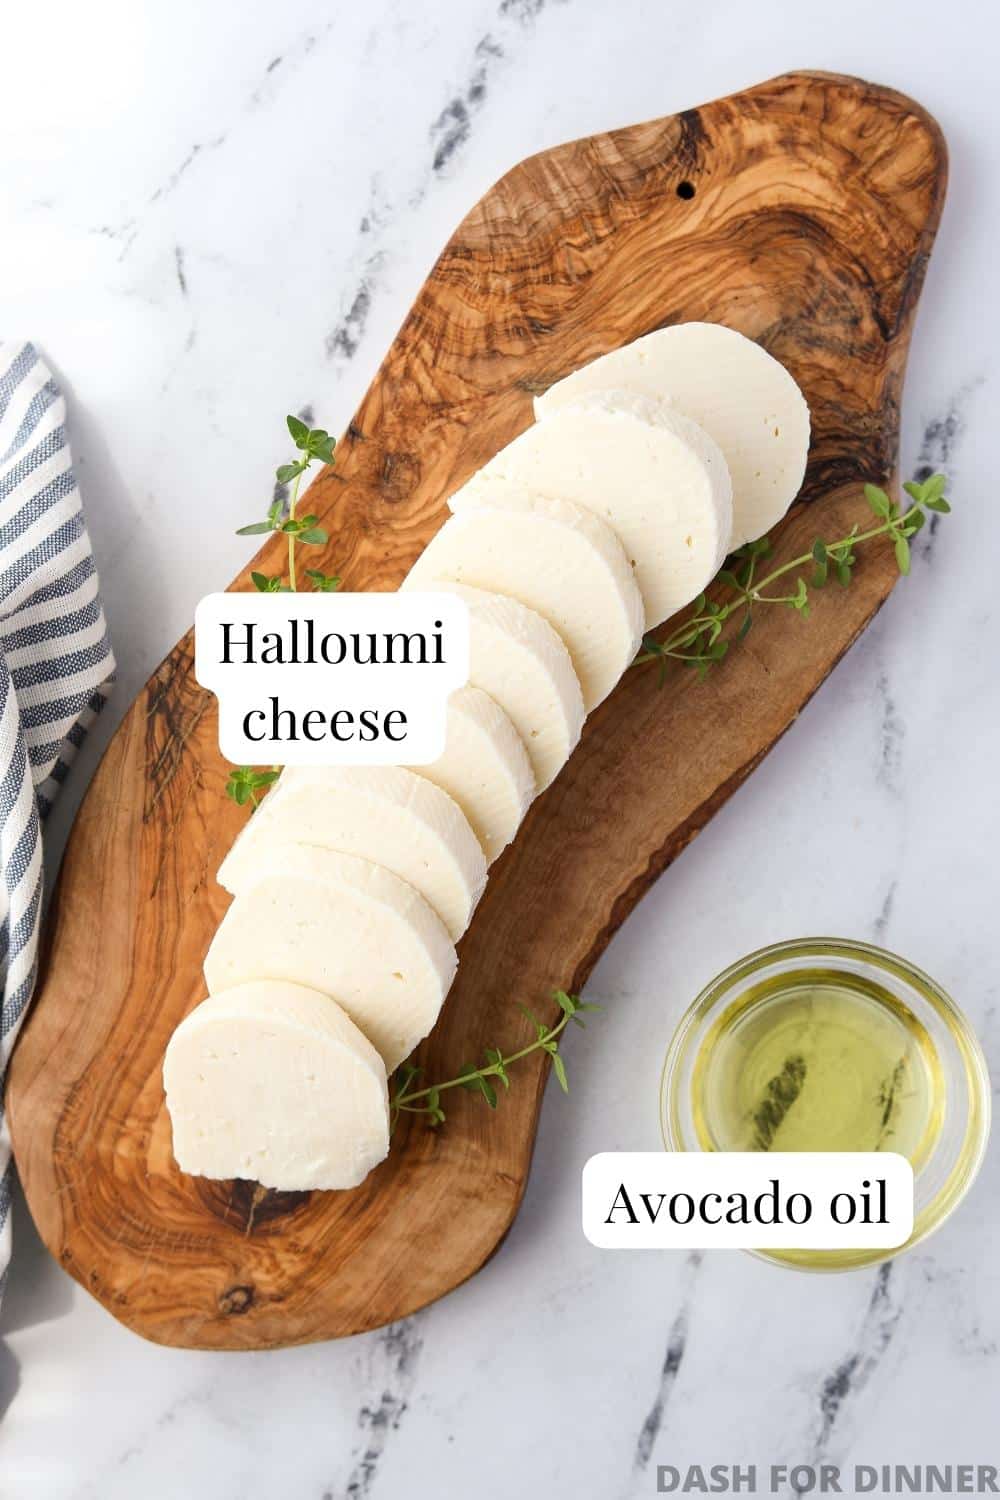 A wooden board with sliced halloumi and a small bowl of avocado oil.